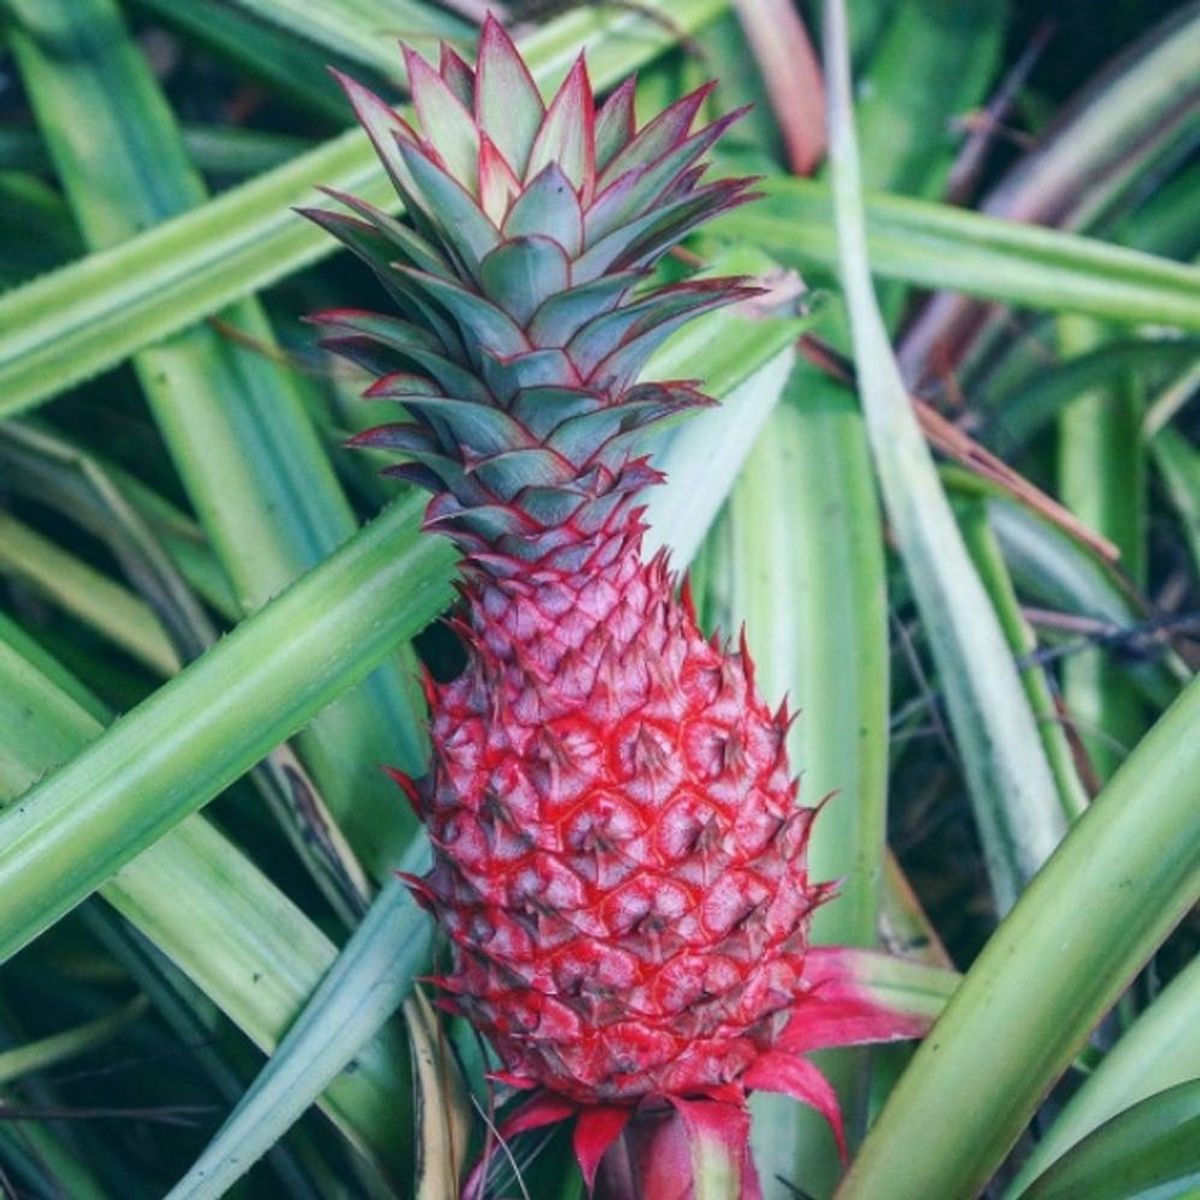 Alert! Millennial Pink Pineapples Are a Thing That Exists Now